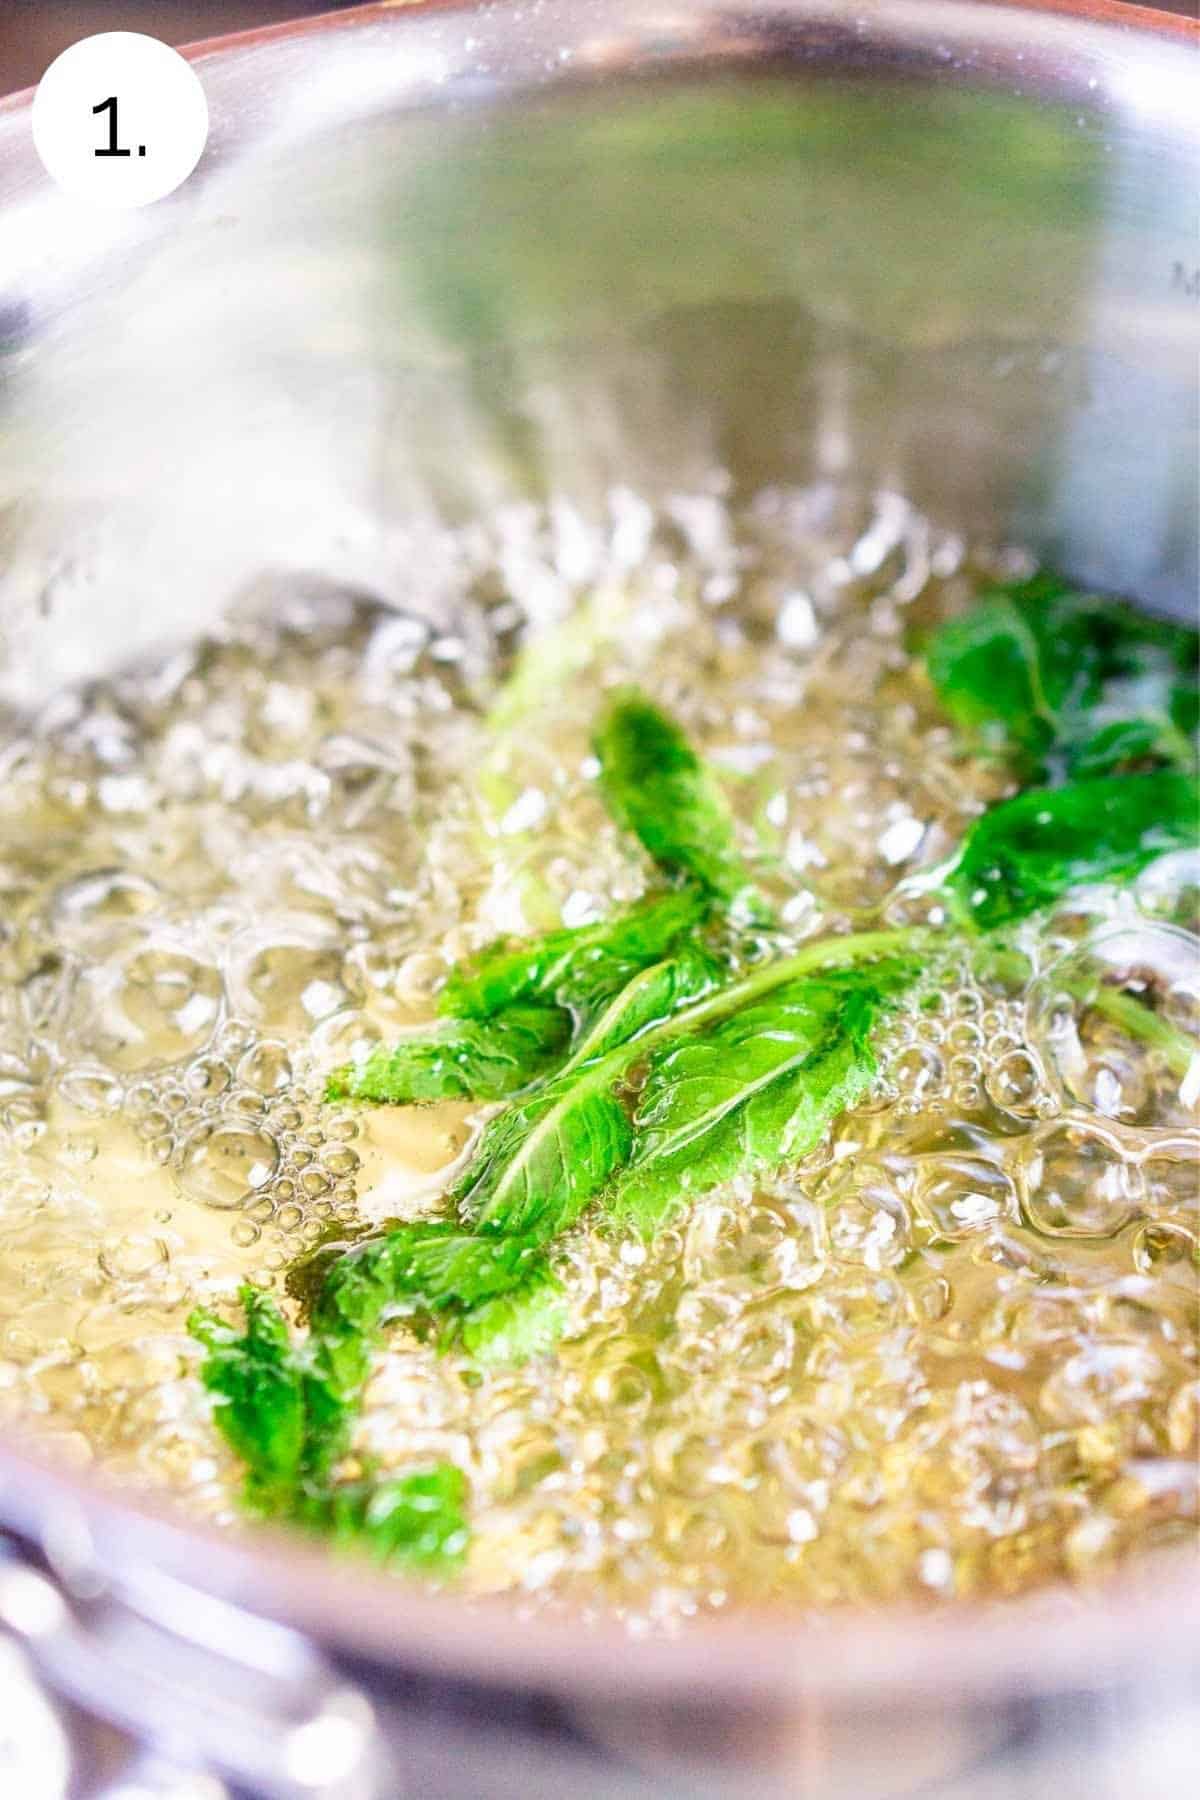 The mint simple syrup boiling in a small saucepan.